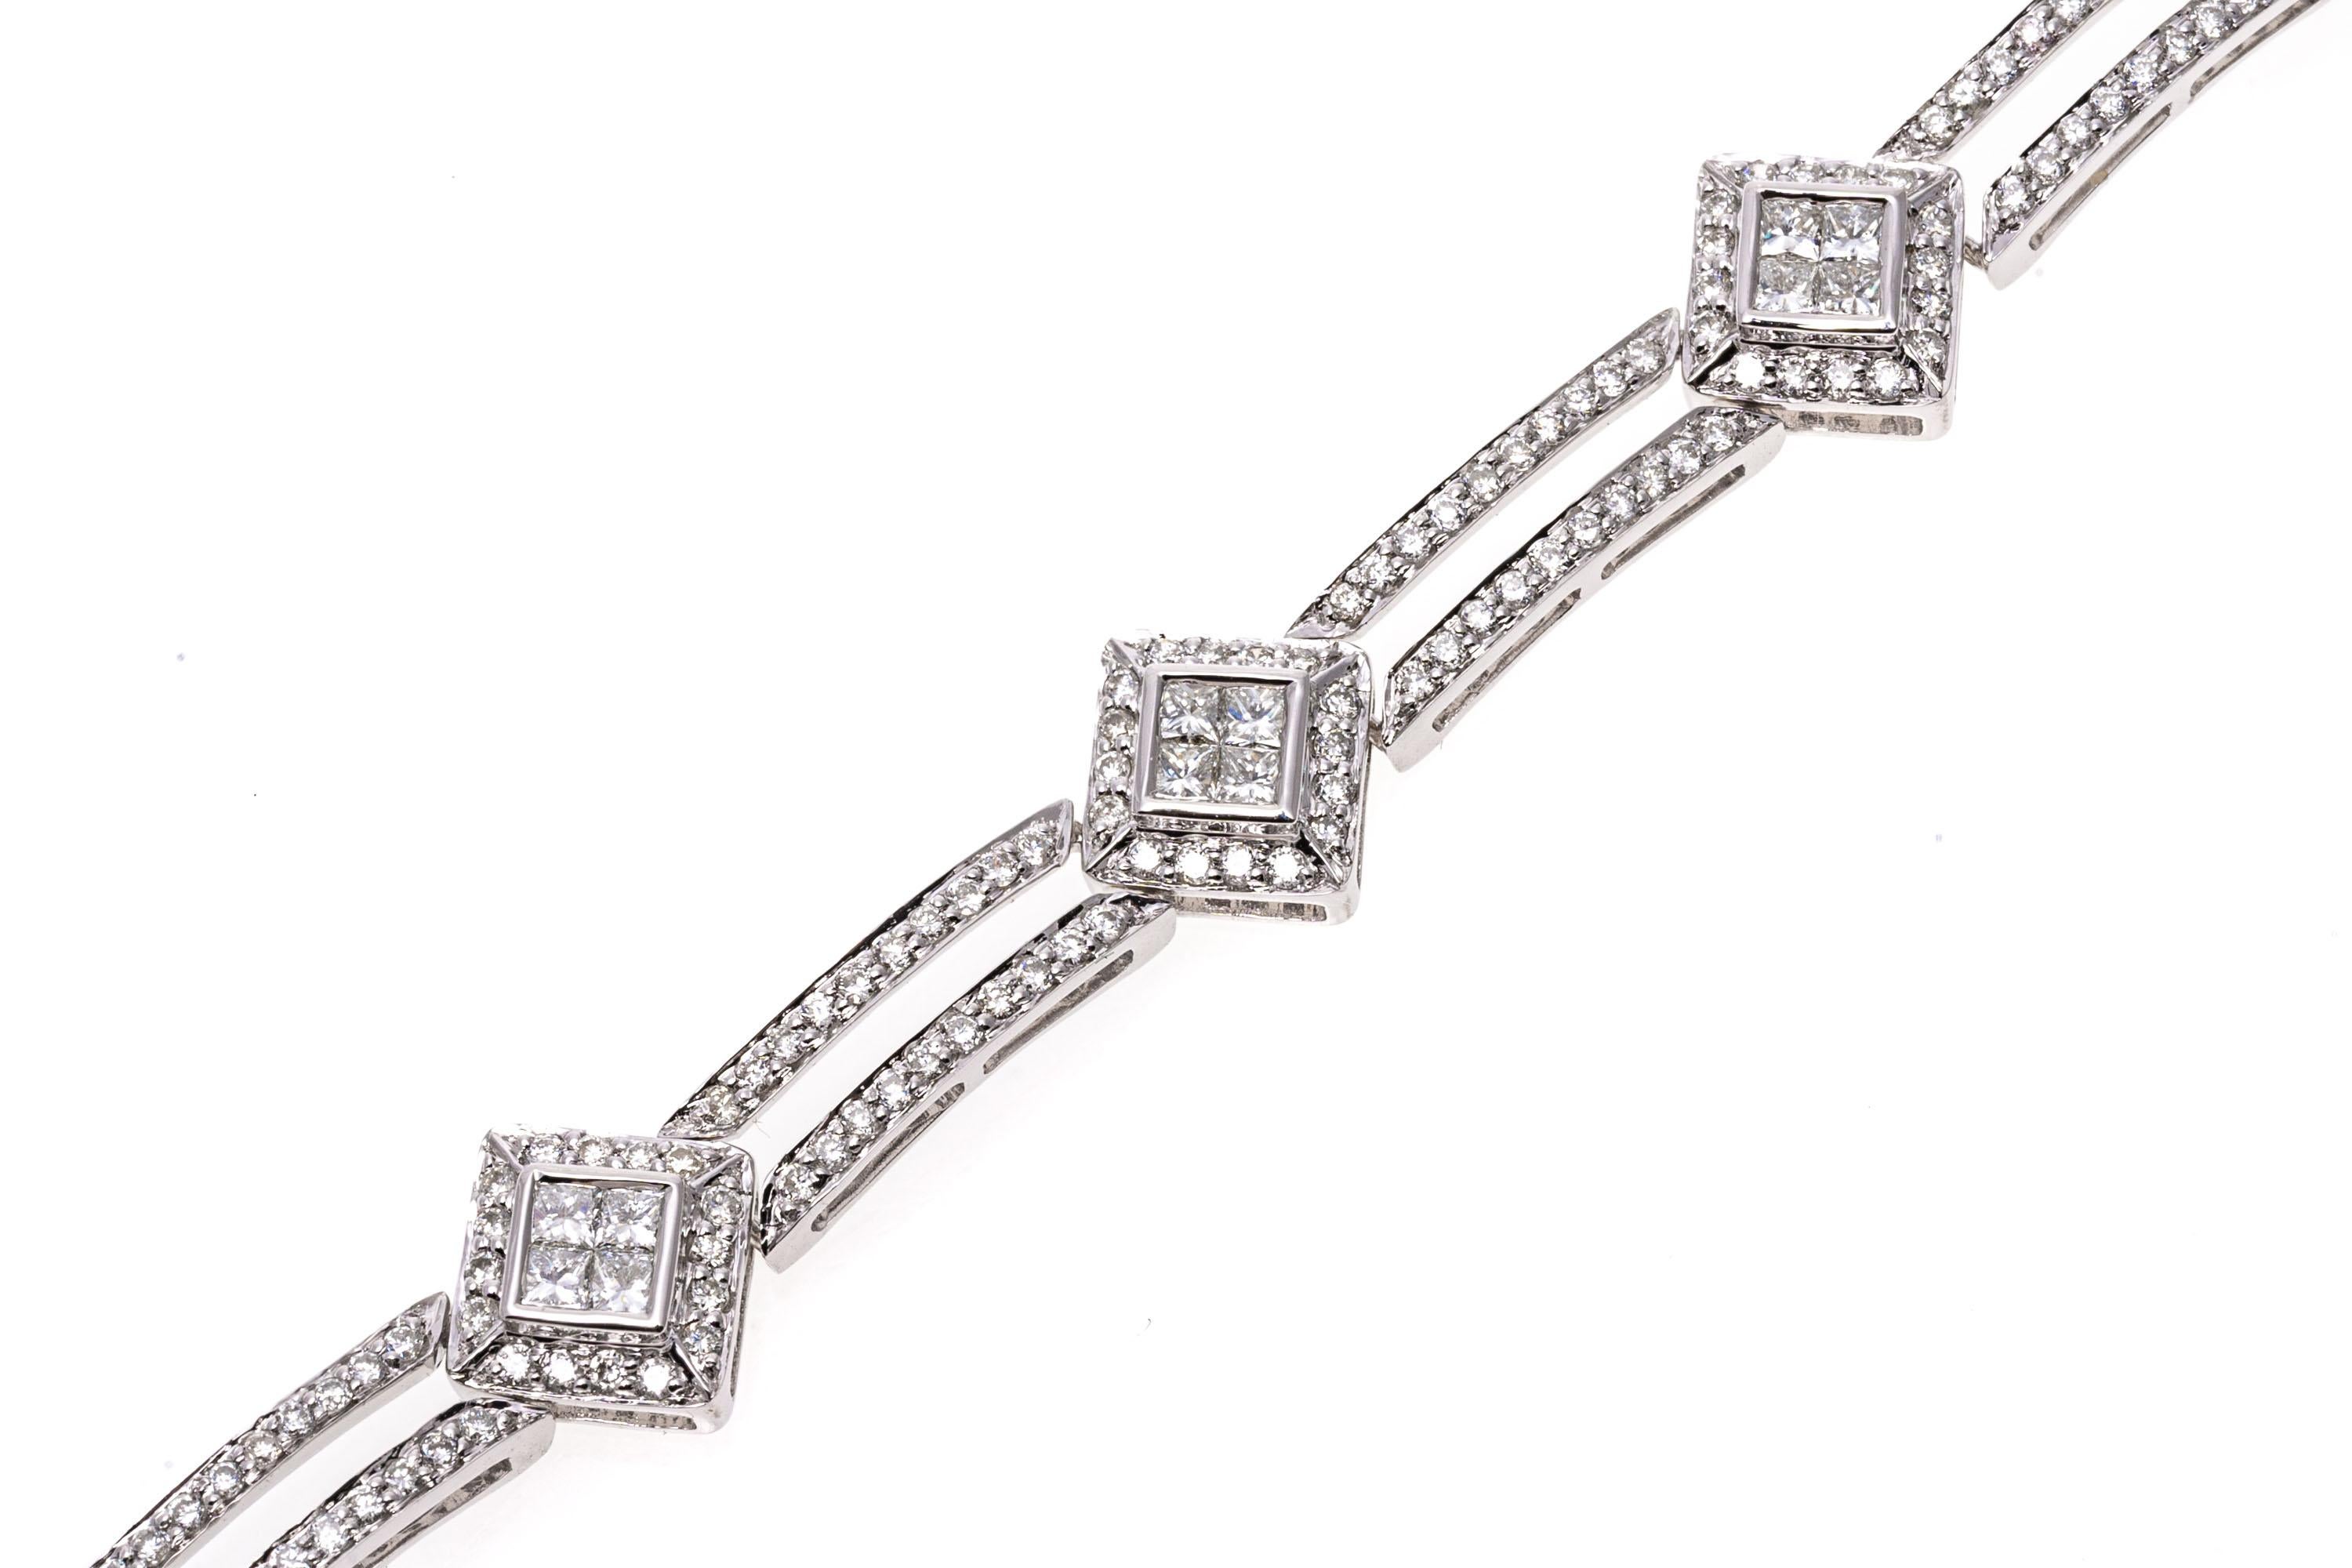 18k white gold bracelet. This stylish white gold bracelet features a double row line of prong set, round faceted diamonds, punctuated with alternating stations of bezel set quadrants of princess cut diamonds, surrounded by a prong set round faceted